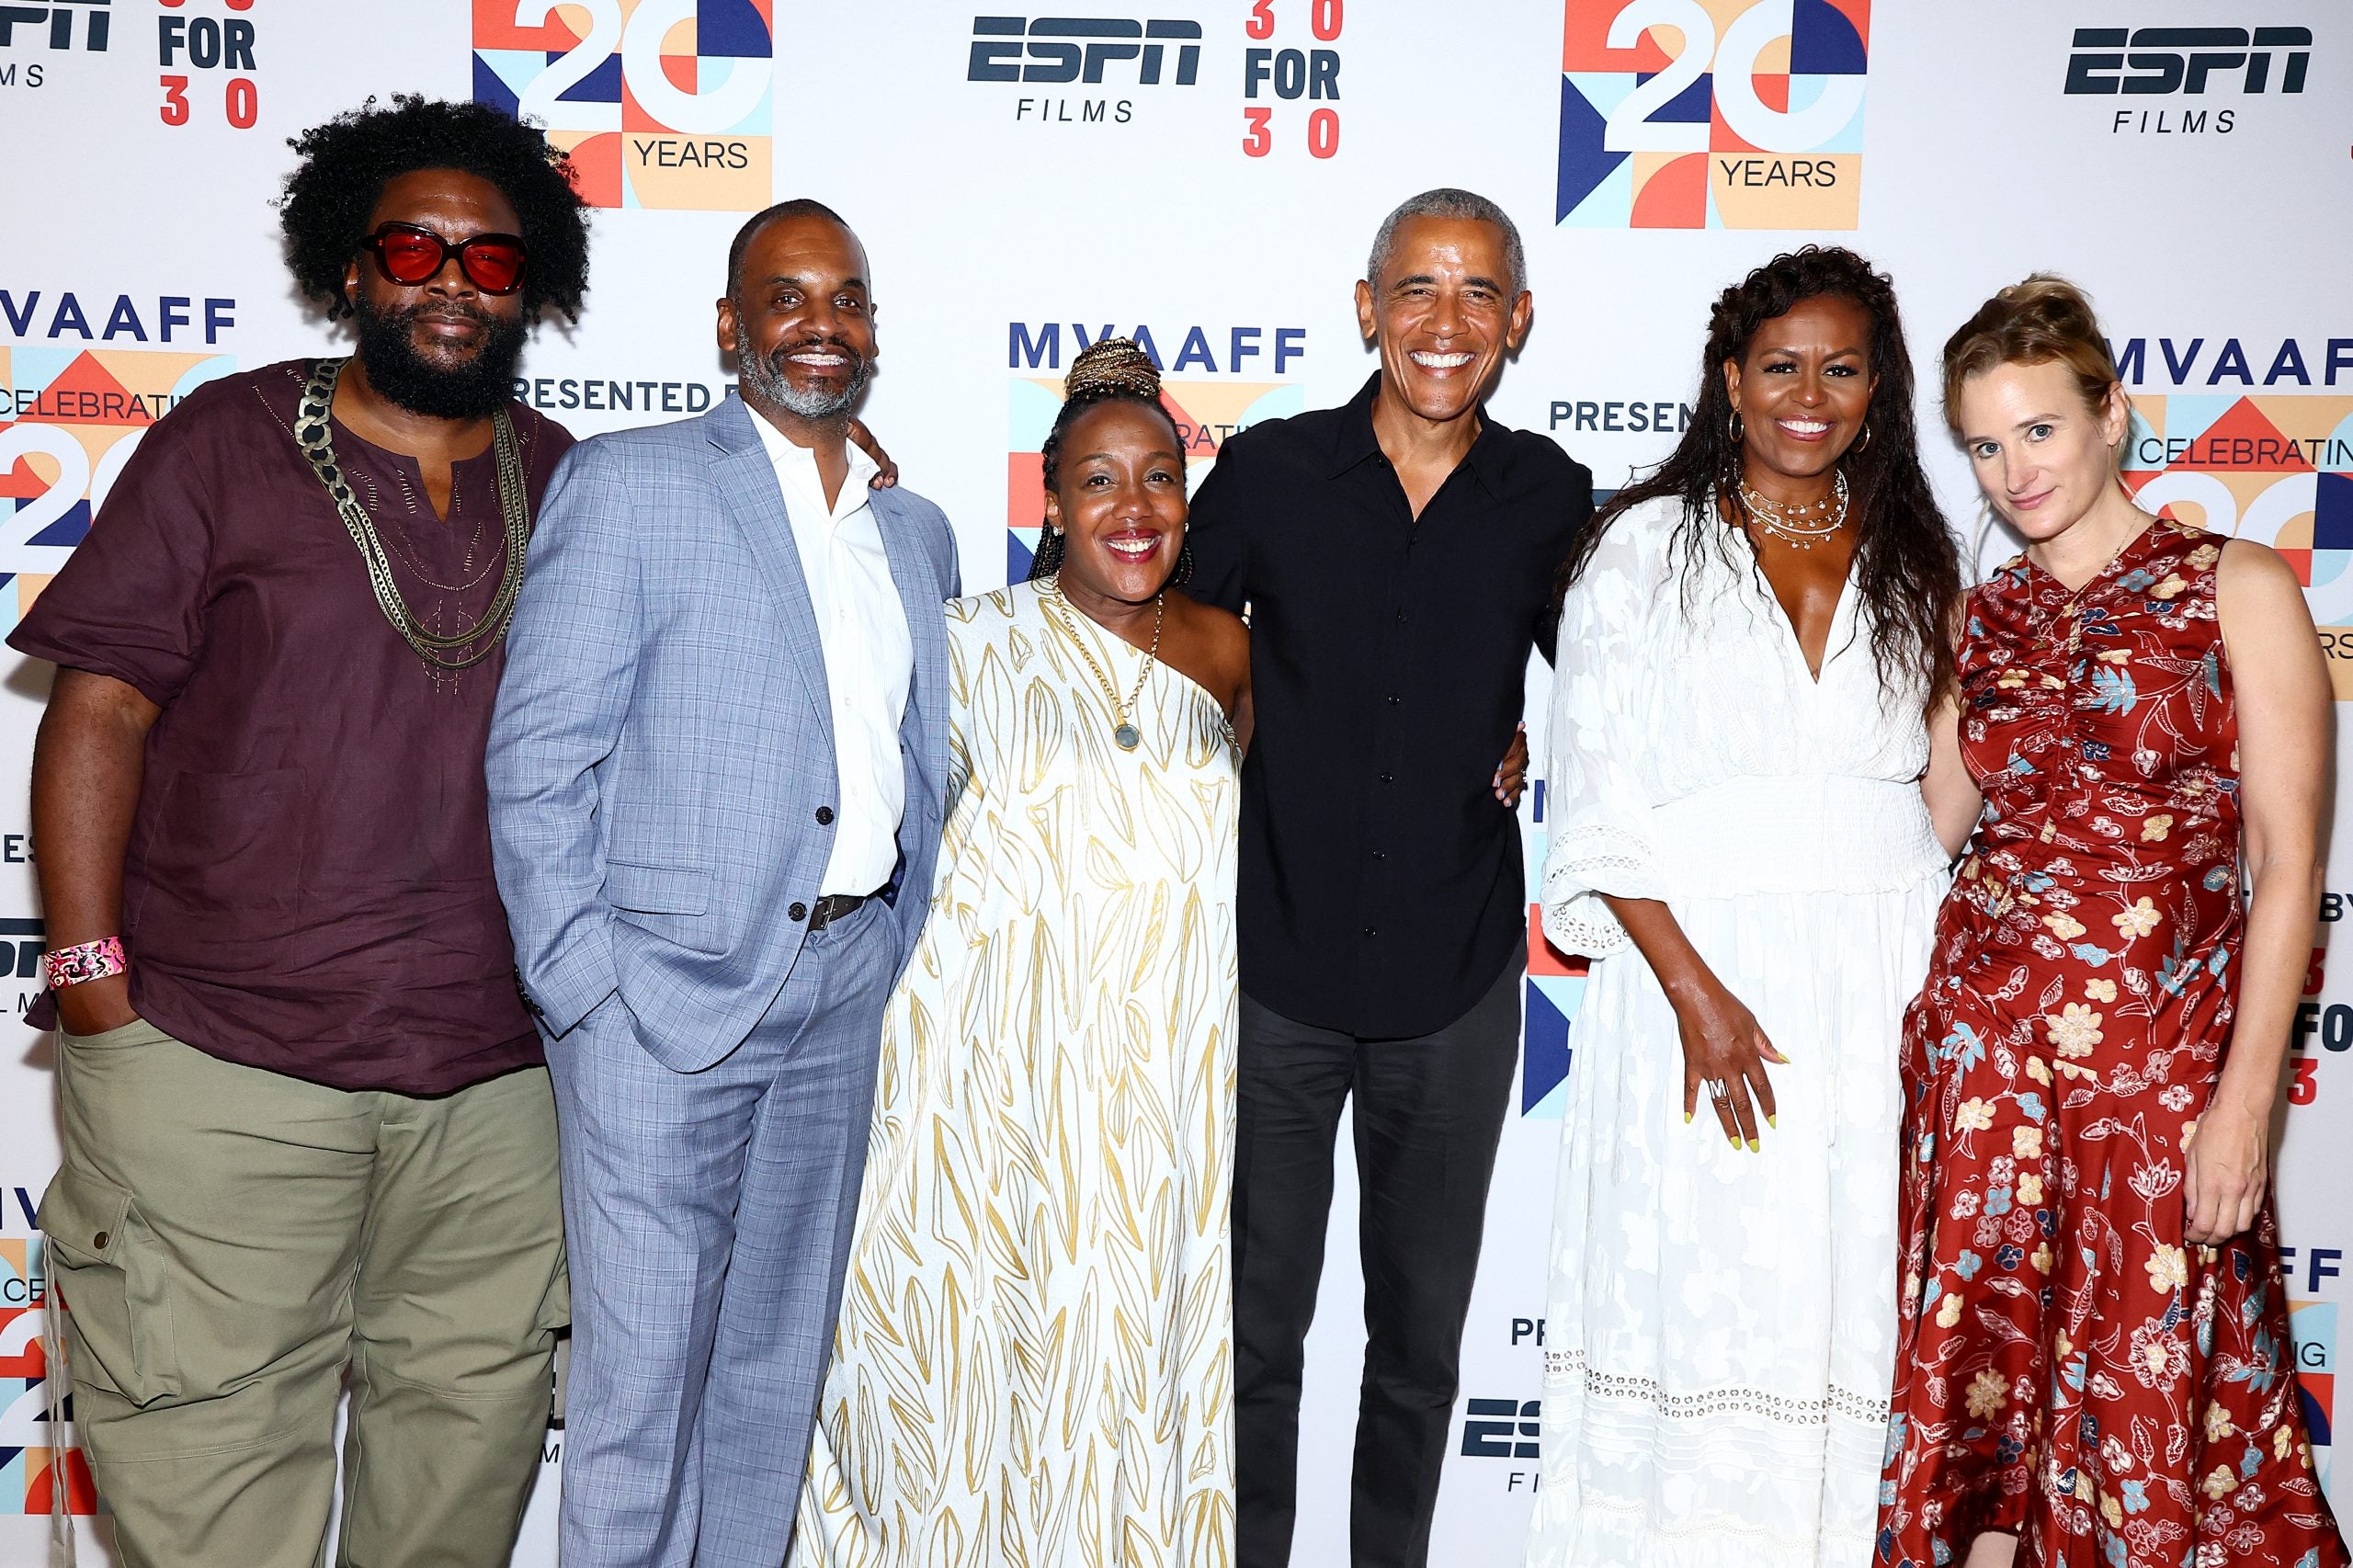 Barack And Michelle Obama Attend Martha’s Vineyard African-American Film Festival